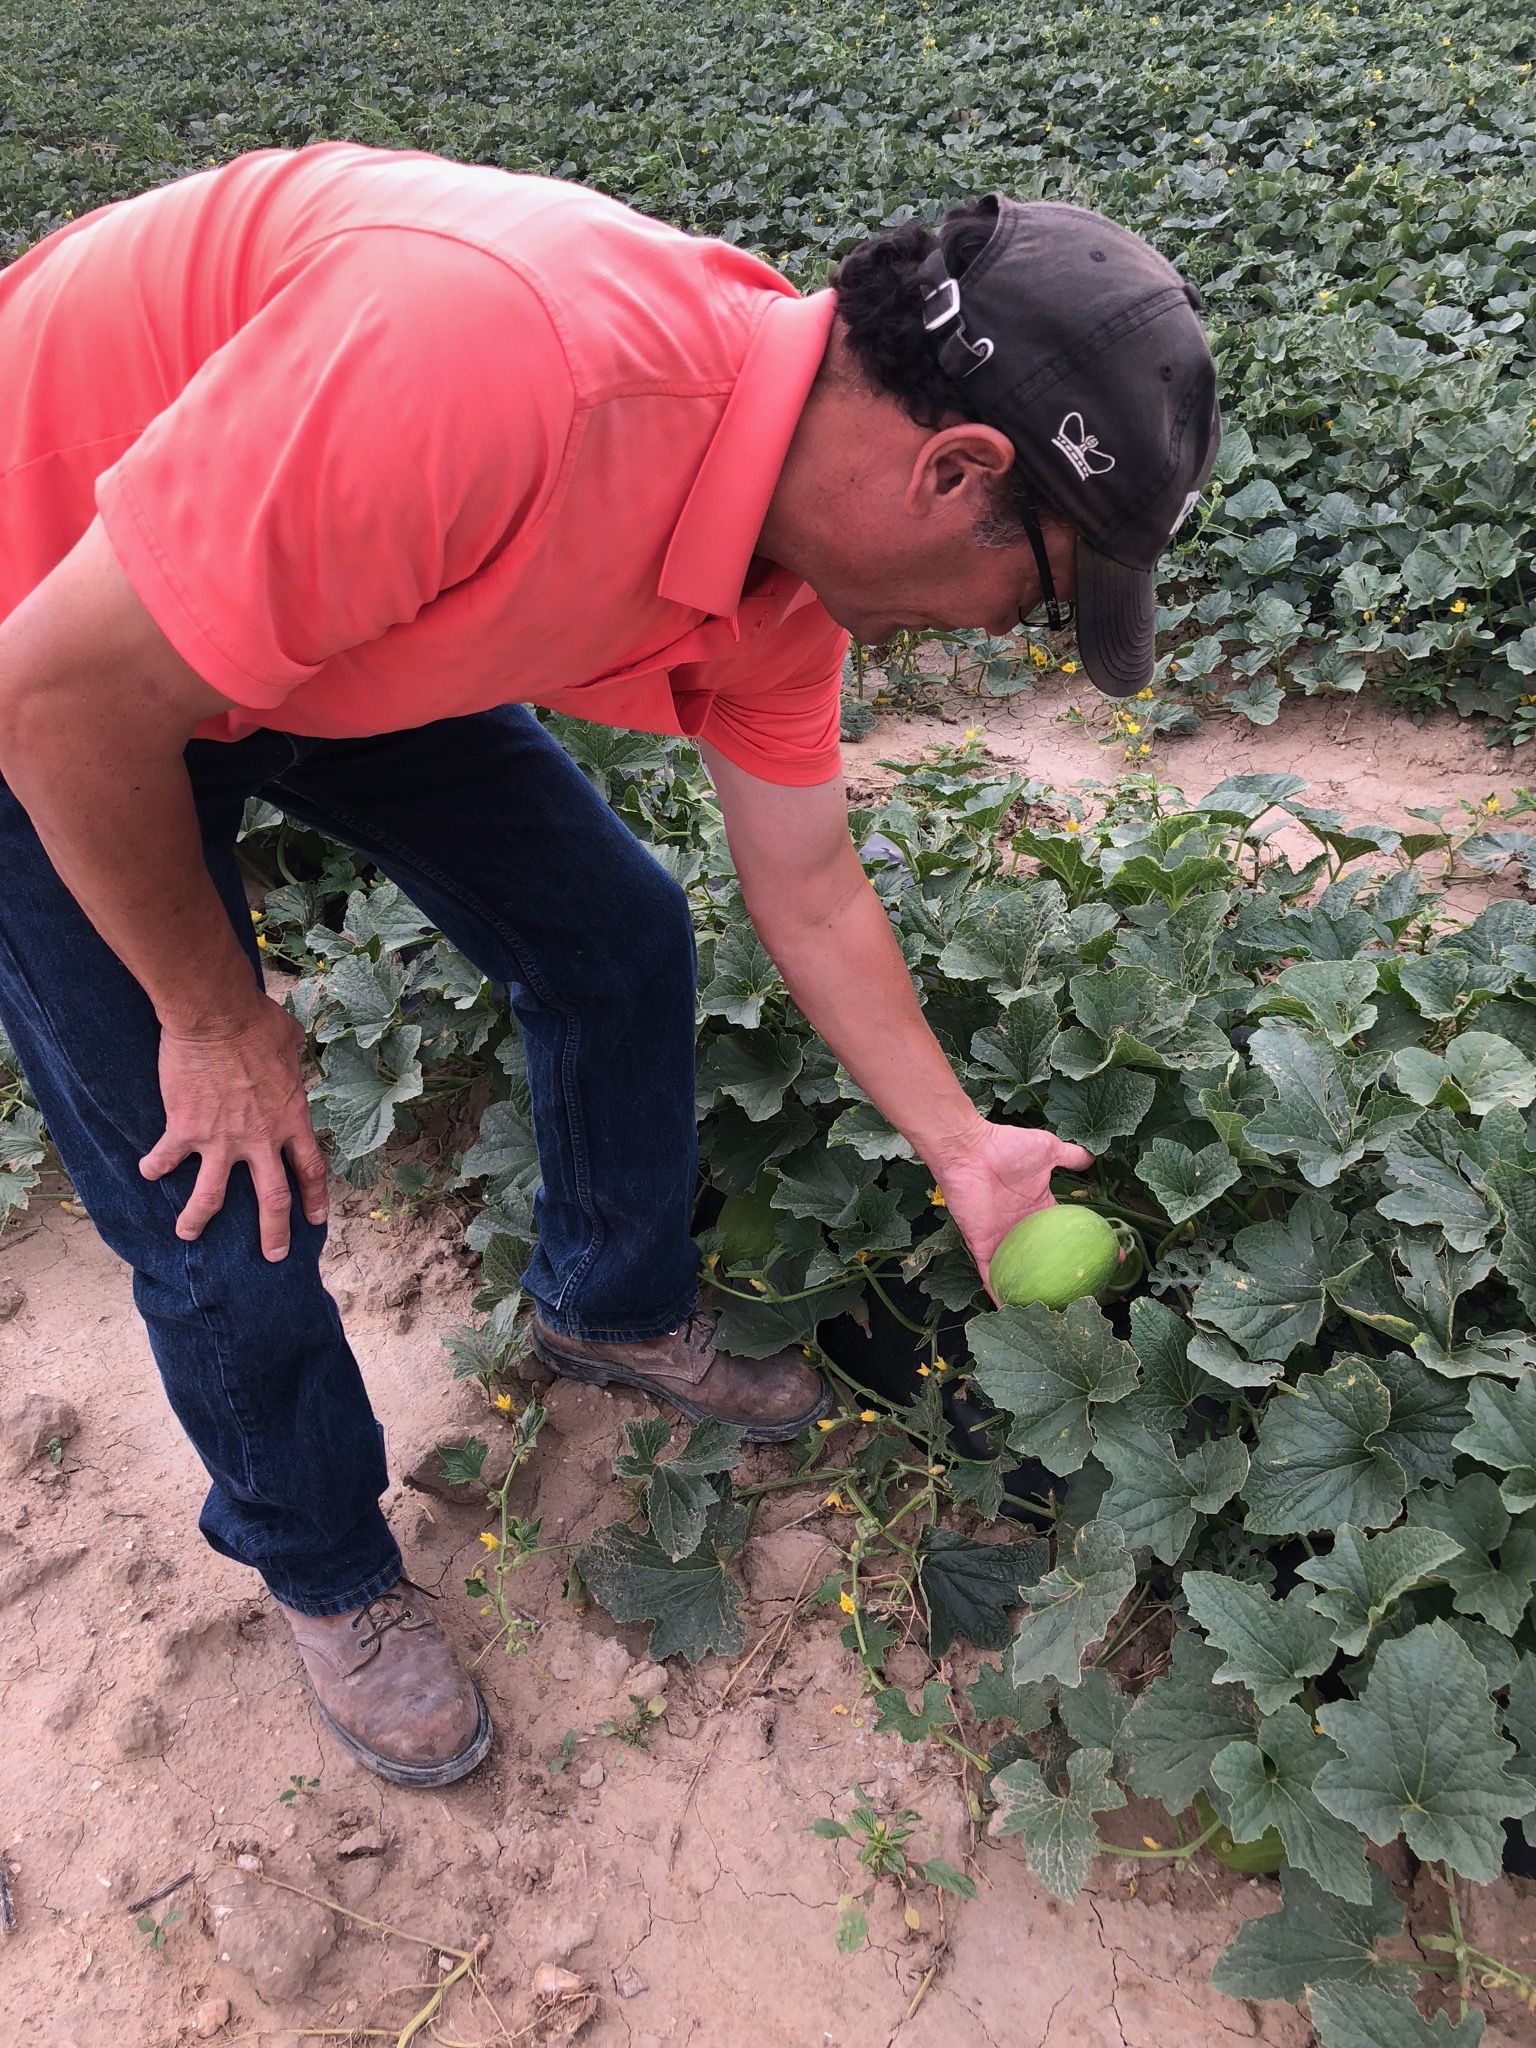 Michael Hirakata, president of the Rocky Ford Growers Association and co-owner of Hirakata Farms, inspects a melon in one of his fields.